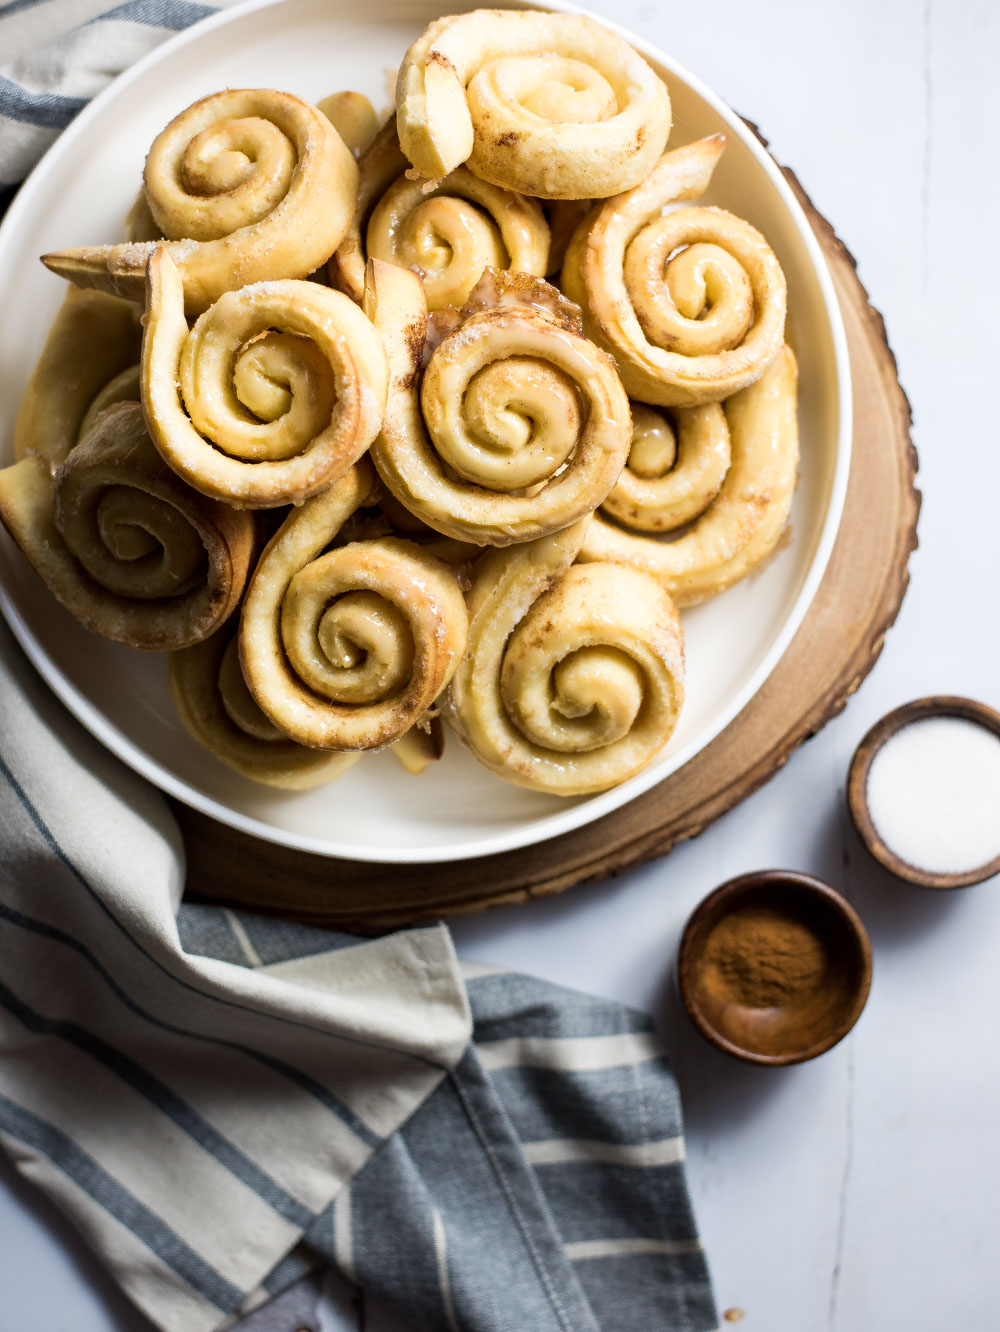 If you are a lover of homemade honey buns and love big and bold spices, these homemade cardamom honey buns are what you need for a relaxing Sunday morning!